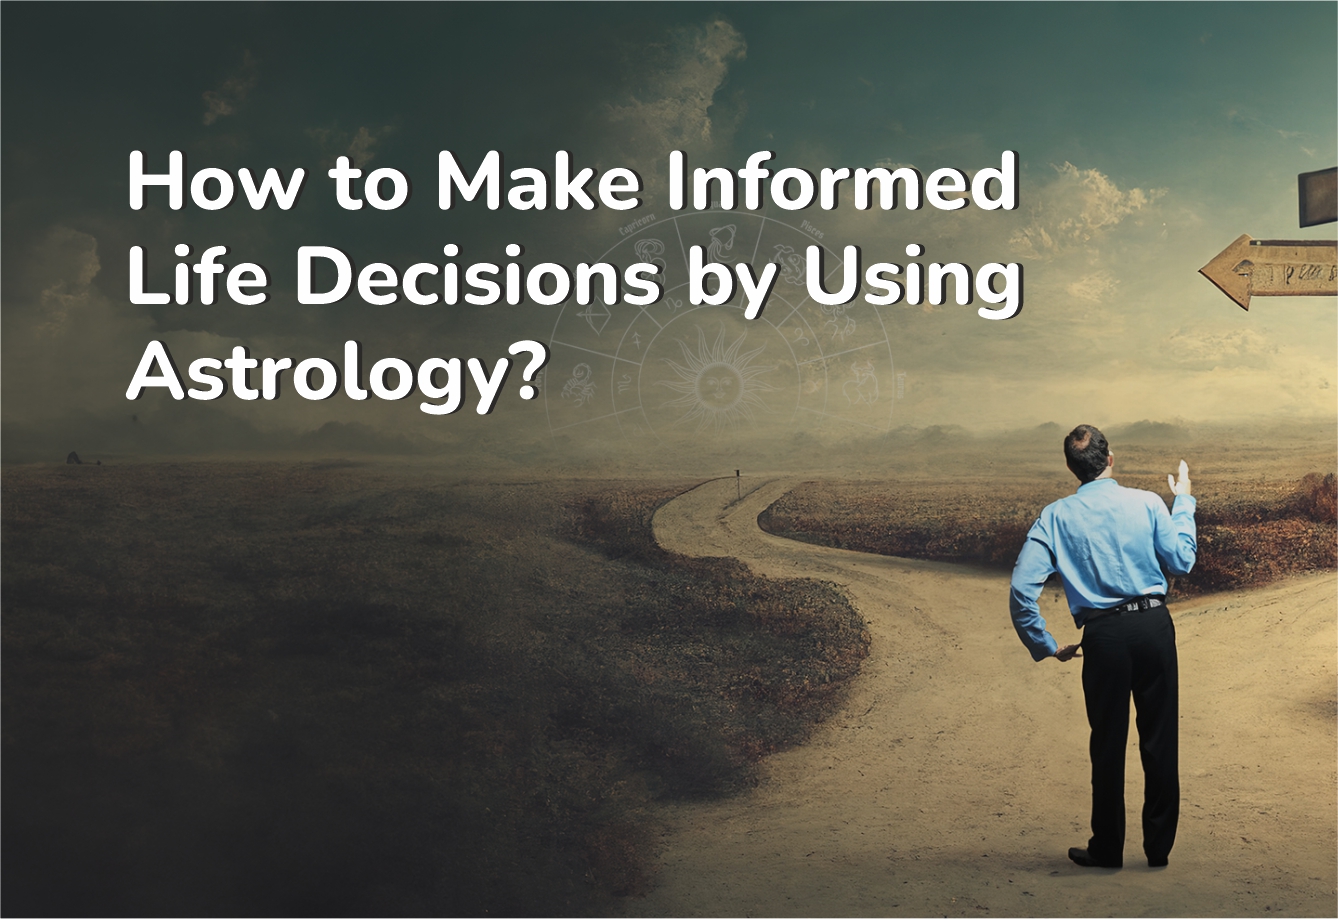 How to Make Informed Life Decisions by Using Astrology?